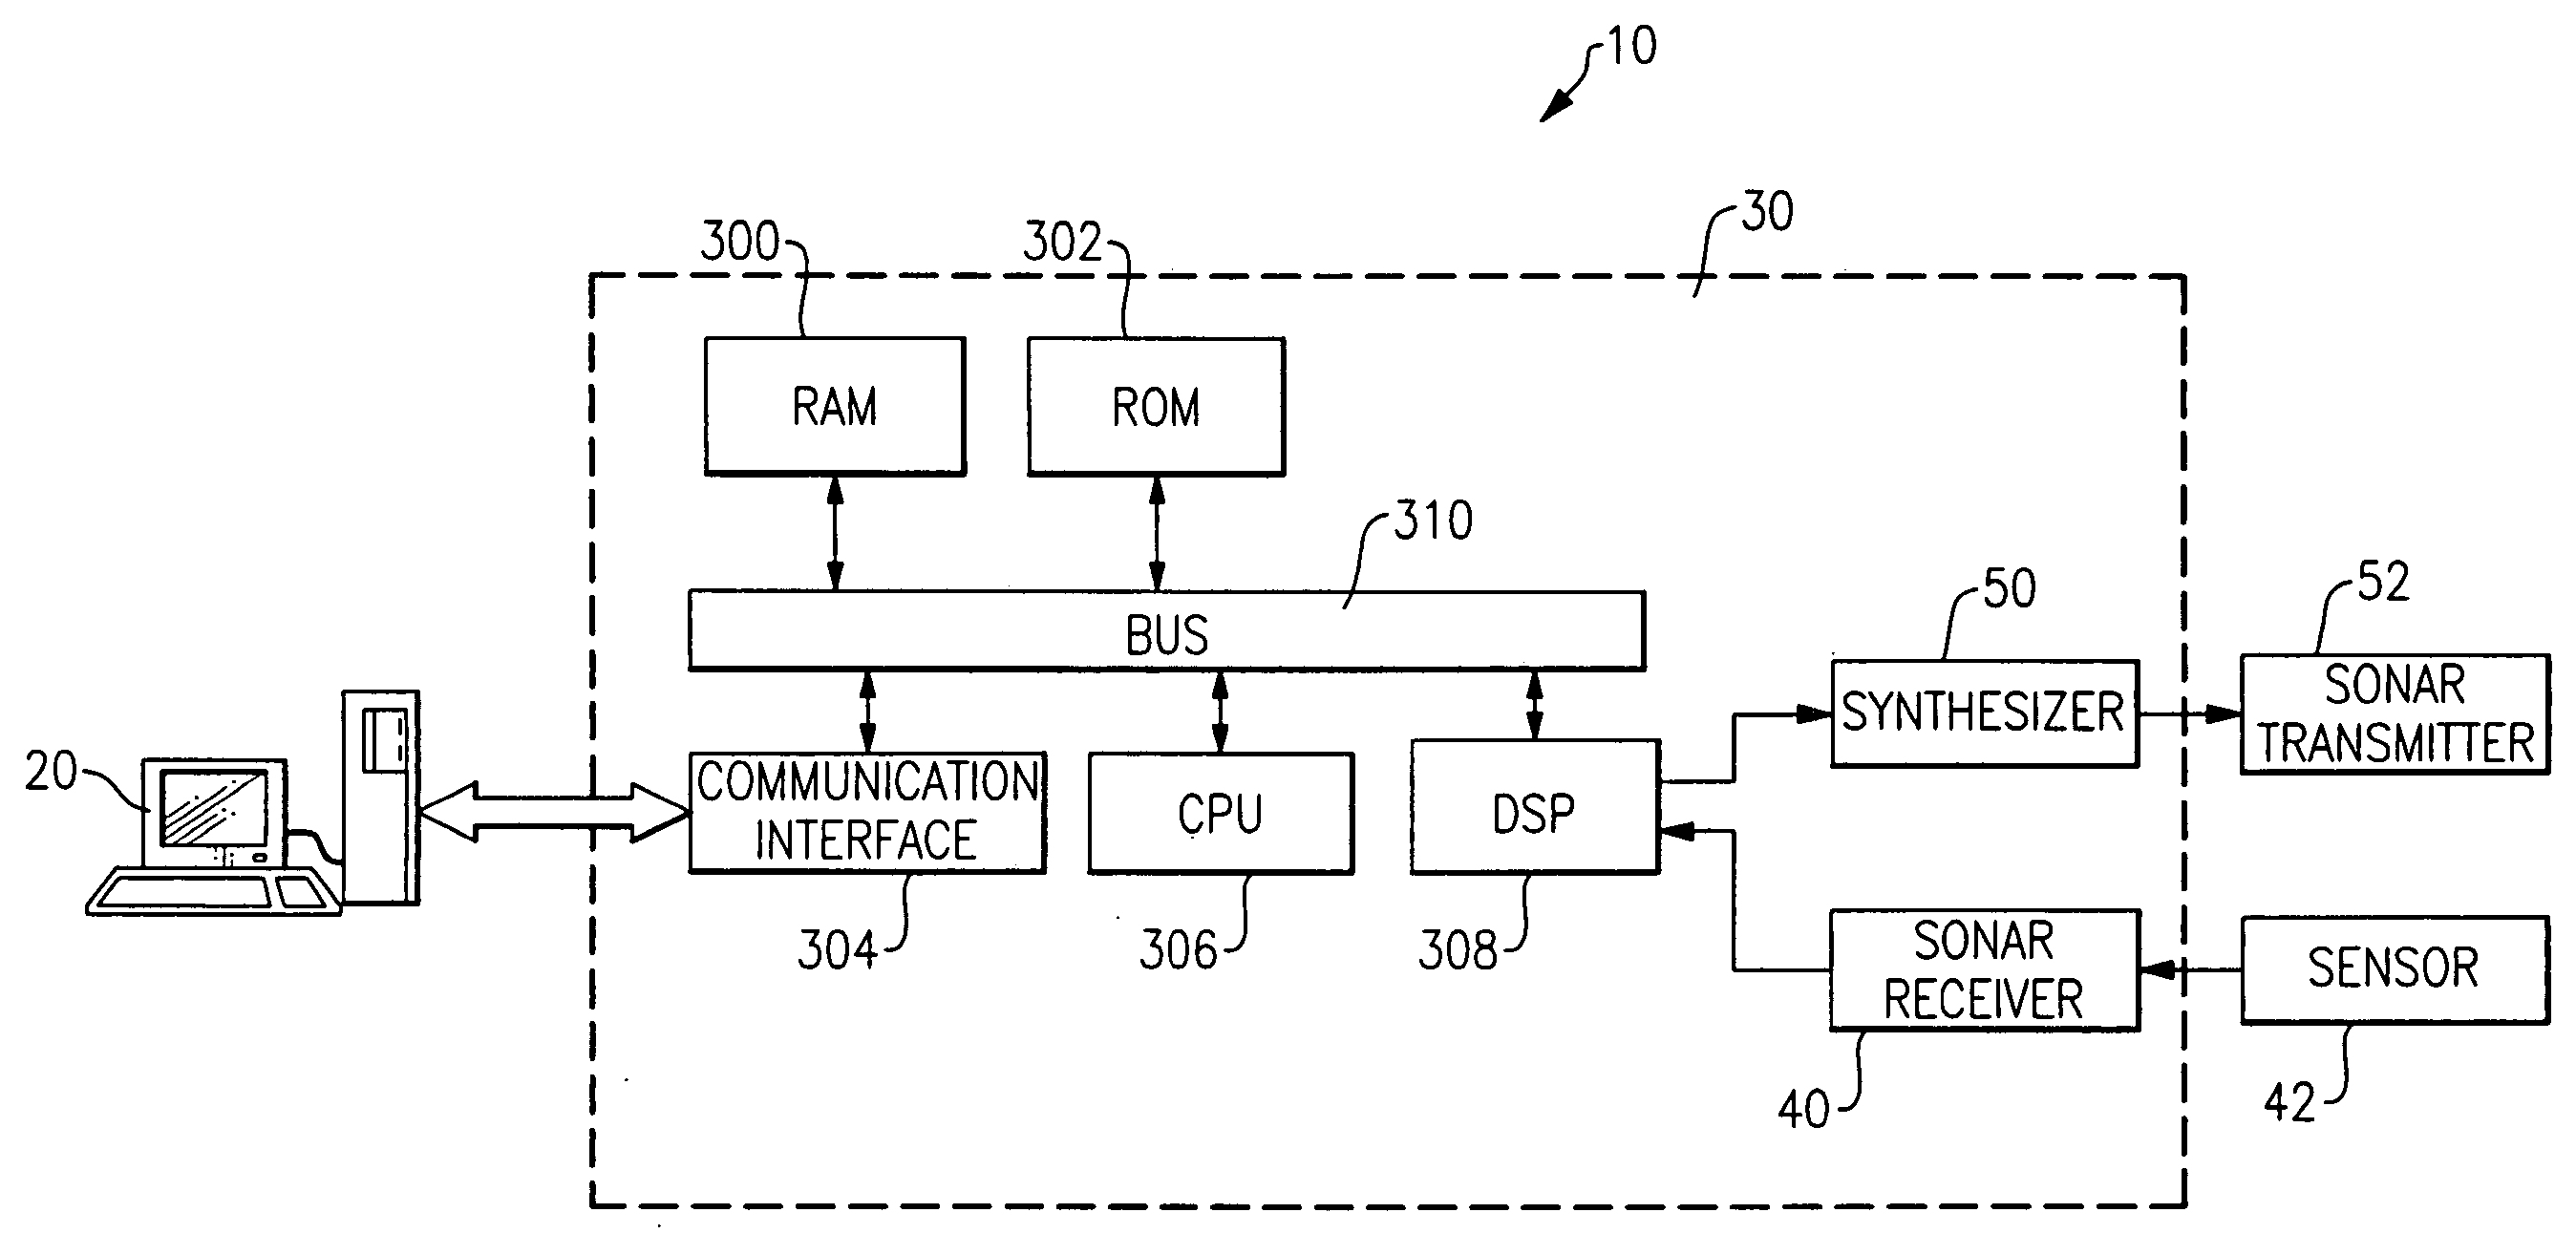 Narrowband phase difference measurement technique for sonar applications